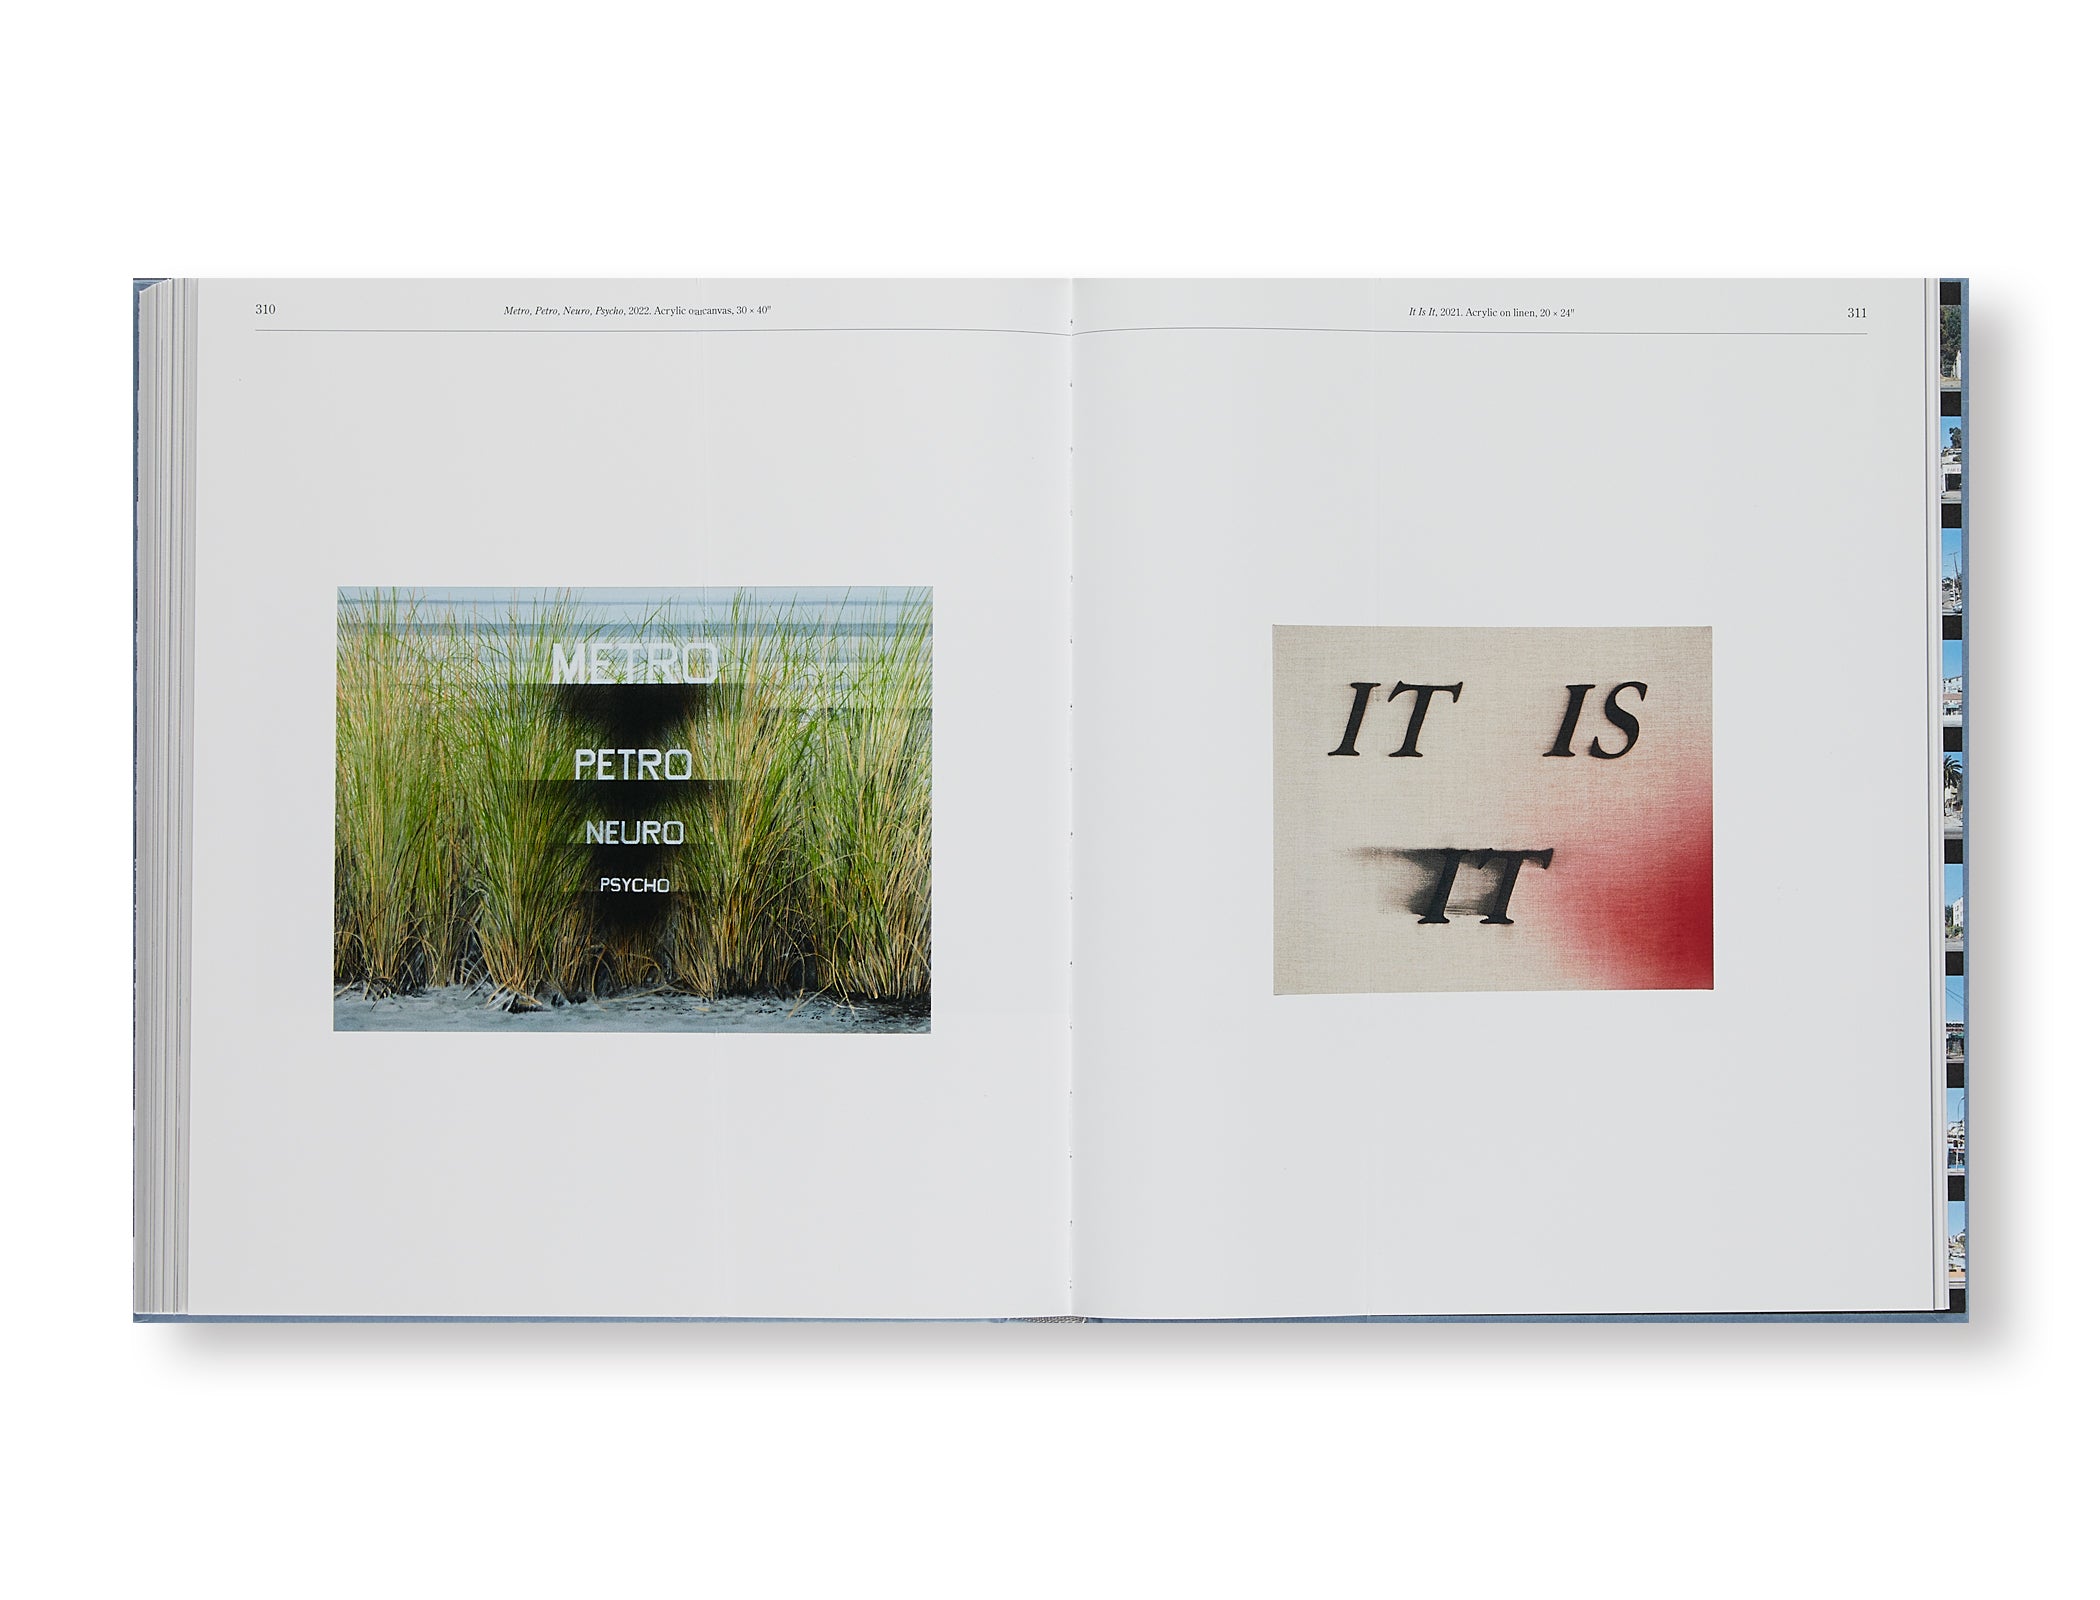 NOW THEN: A RETROSPECTIVE by Ed Ruscha